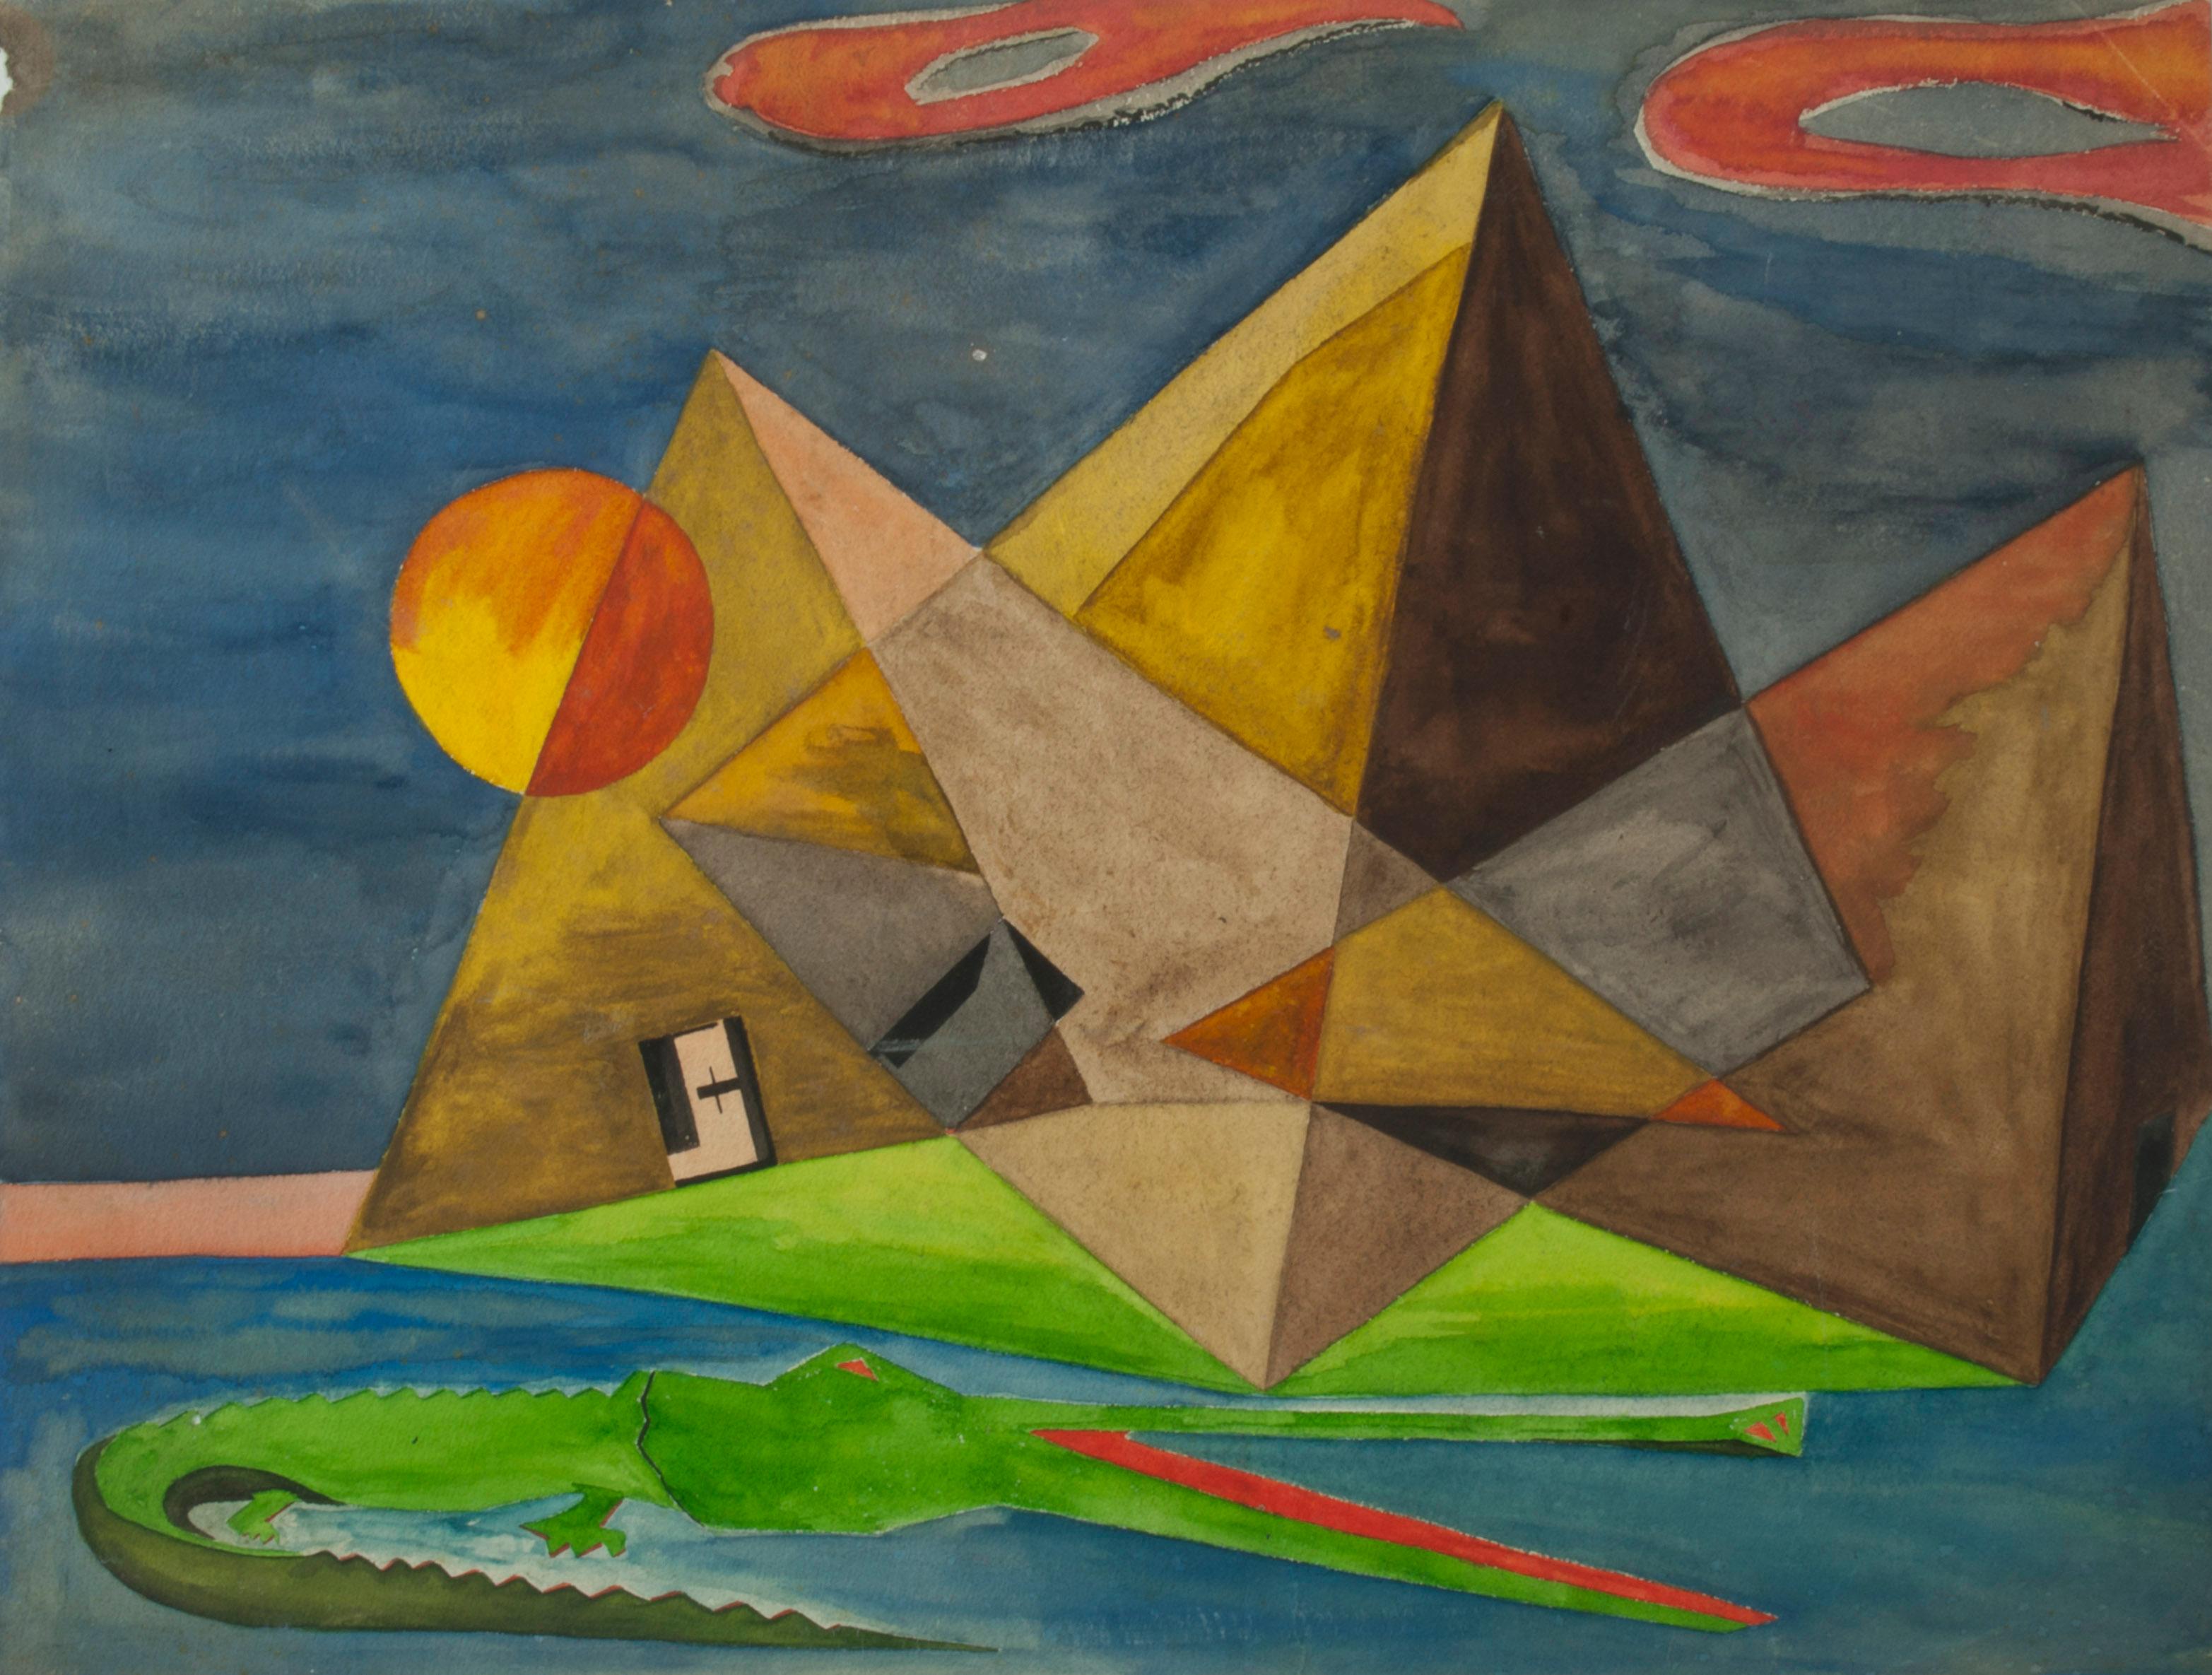 Untitled (Surrealist rendering of Pyramids at Giza with alligator)